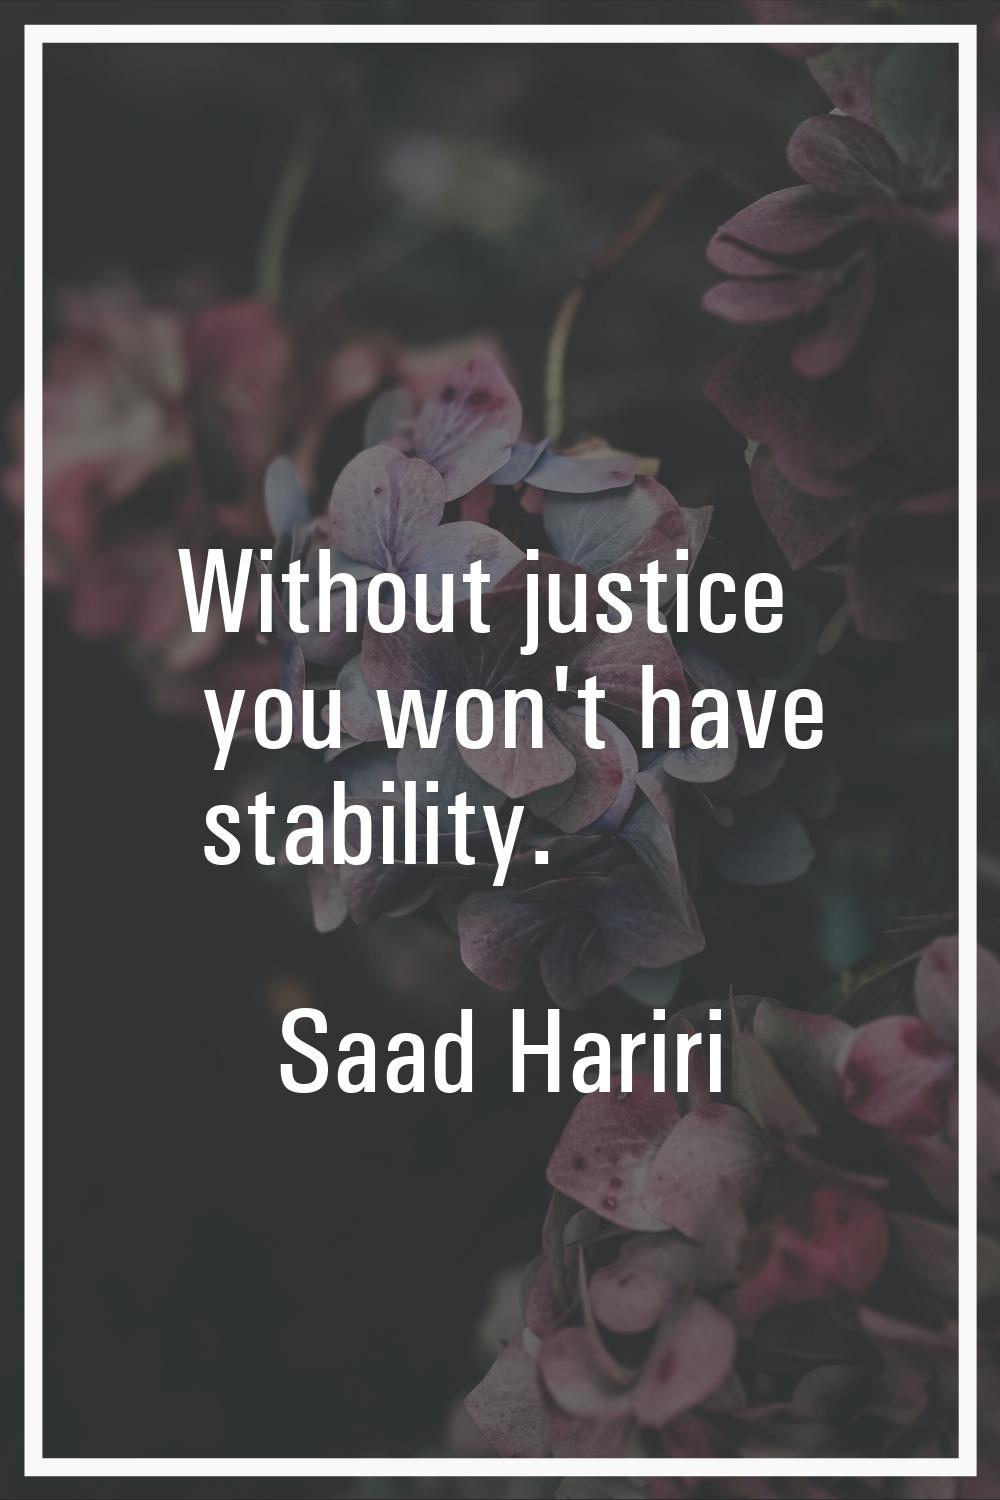 Without justice you won't have stability.